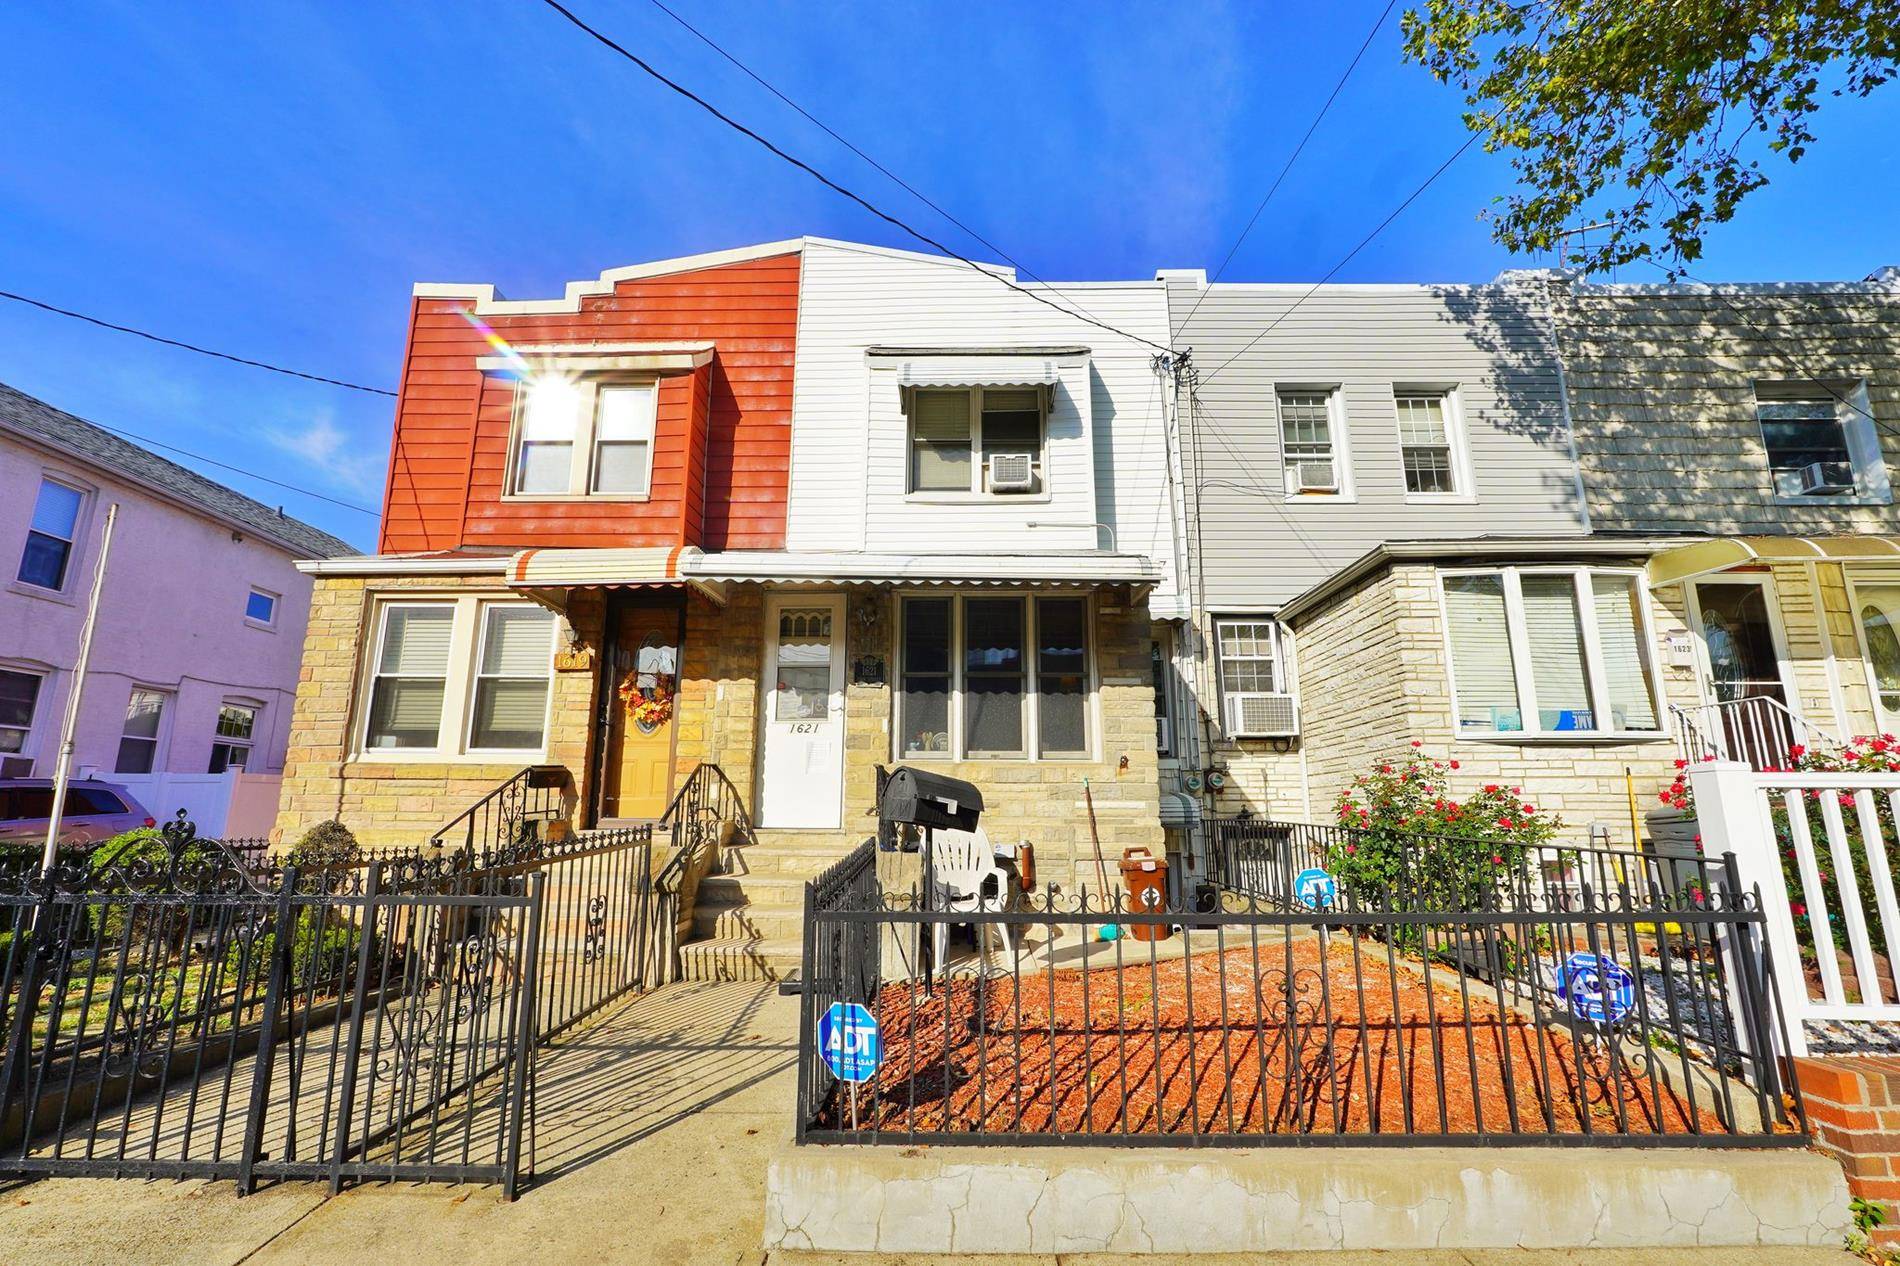 This is a single family property located in Bensonhurst, Brooklyn.